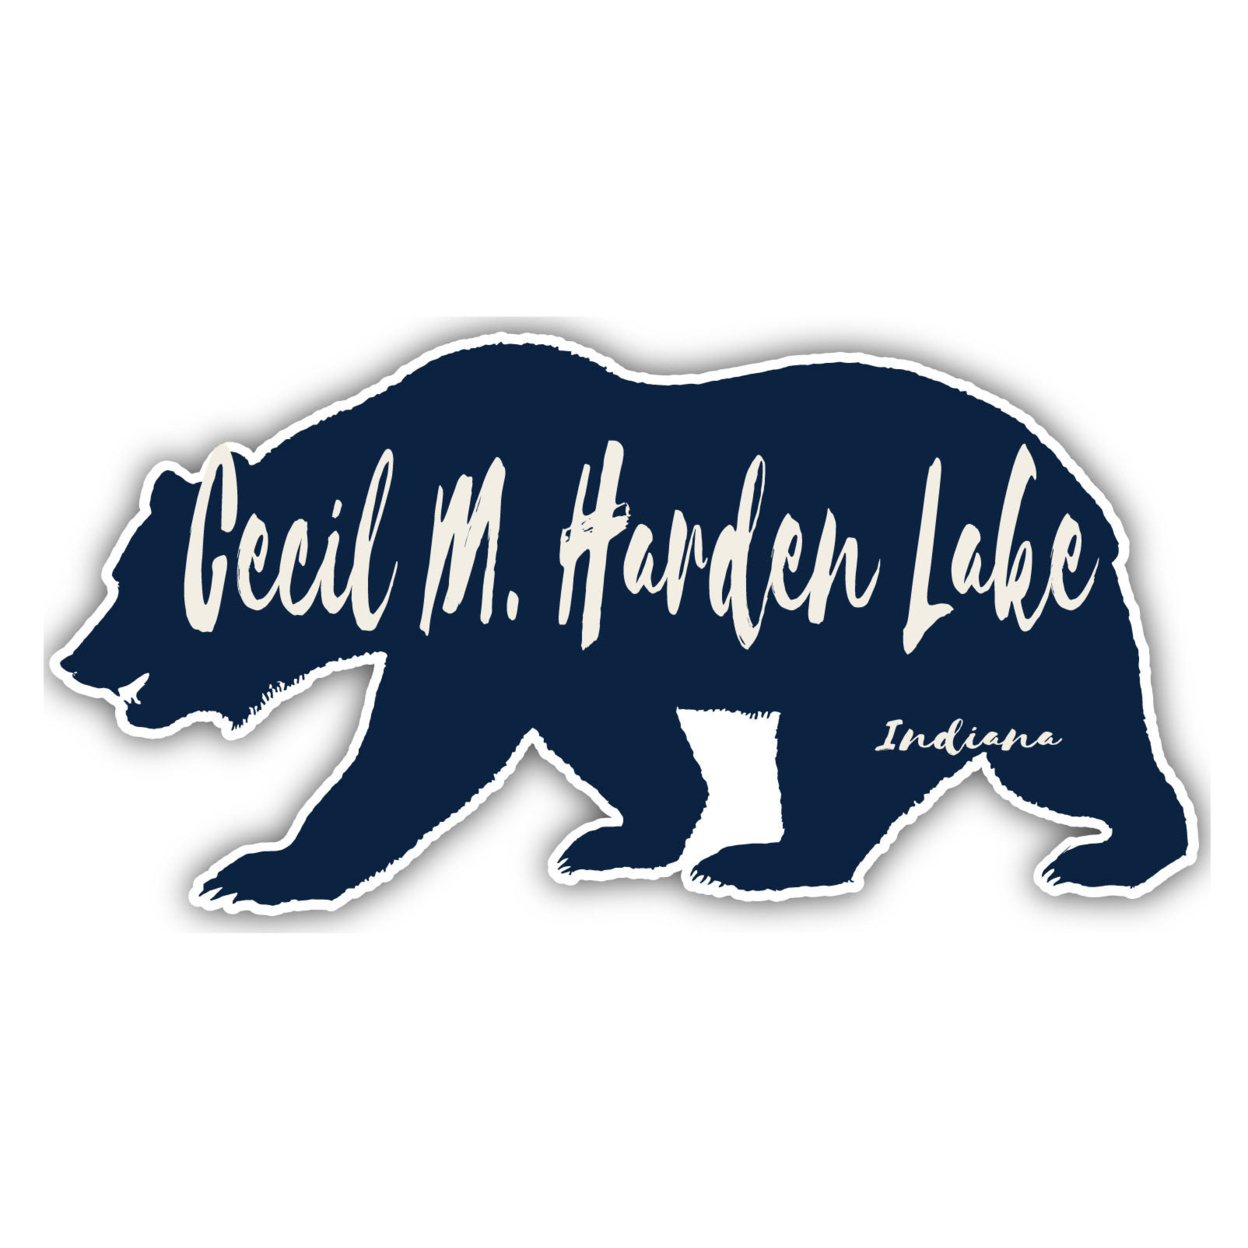 Cecil M. Harden Lake Indiana Souvenir Decorative Stickers (Choose Theme And Size) - 4-Pack, 4-Inch, Bear